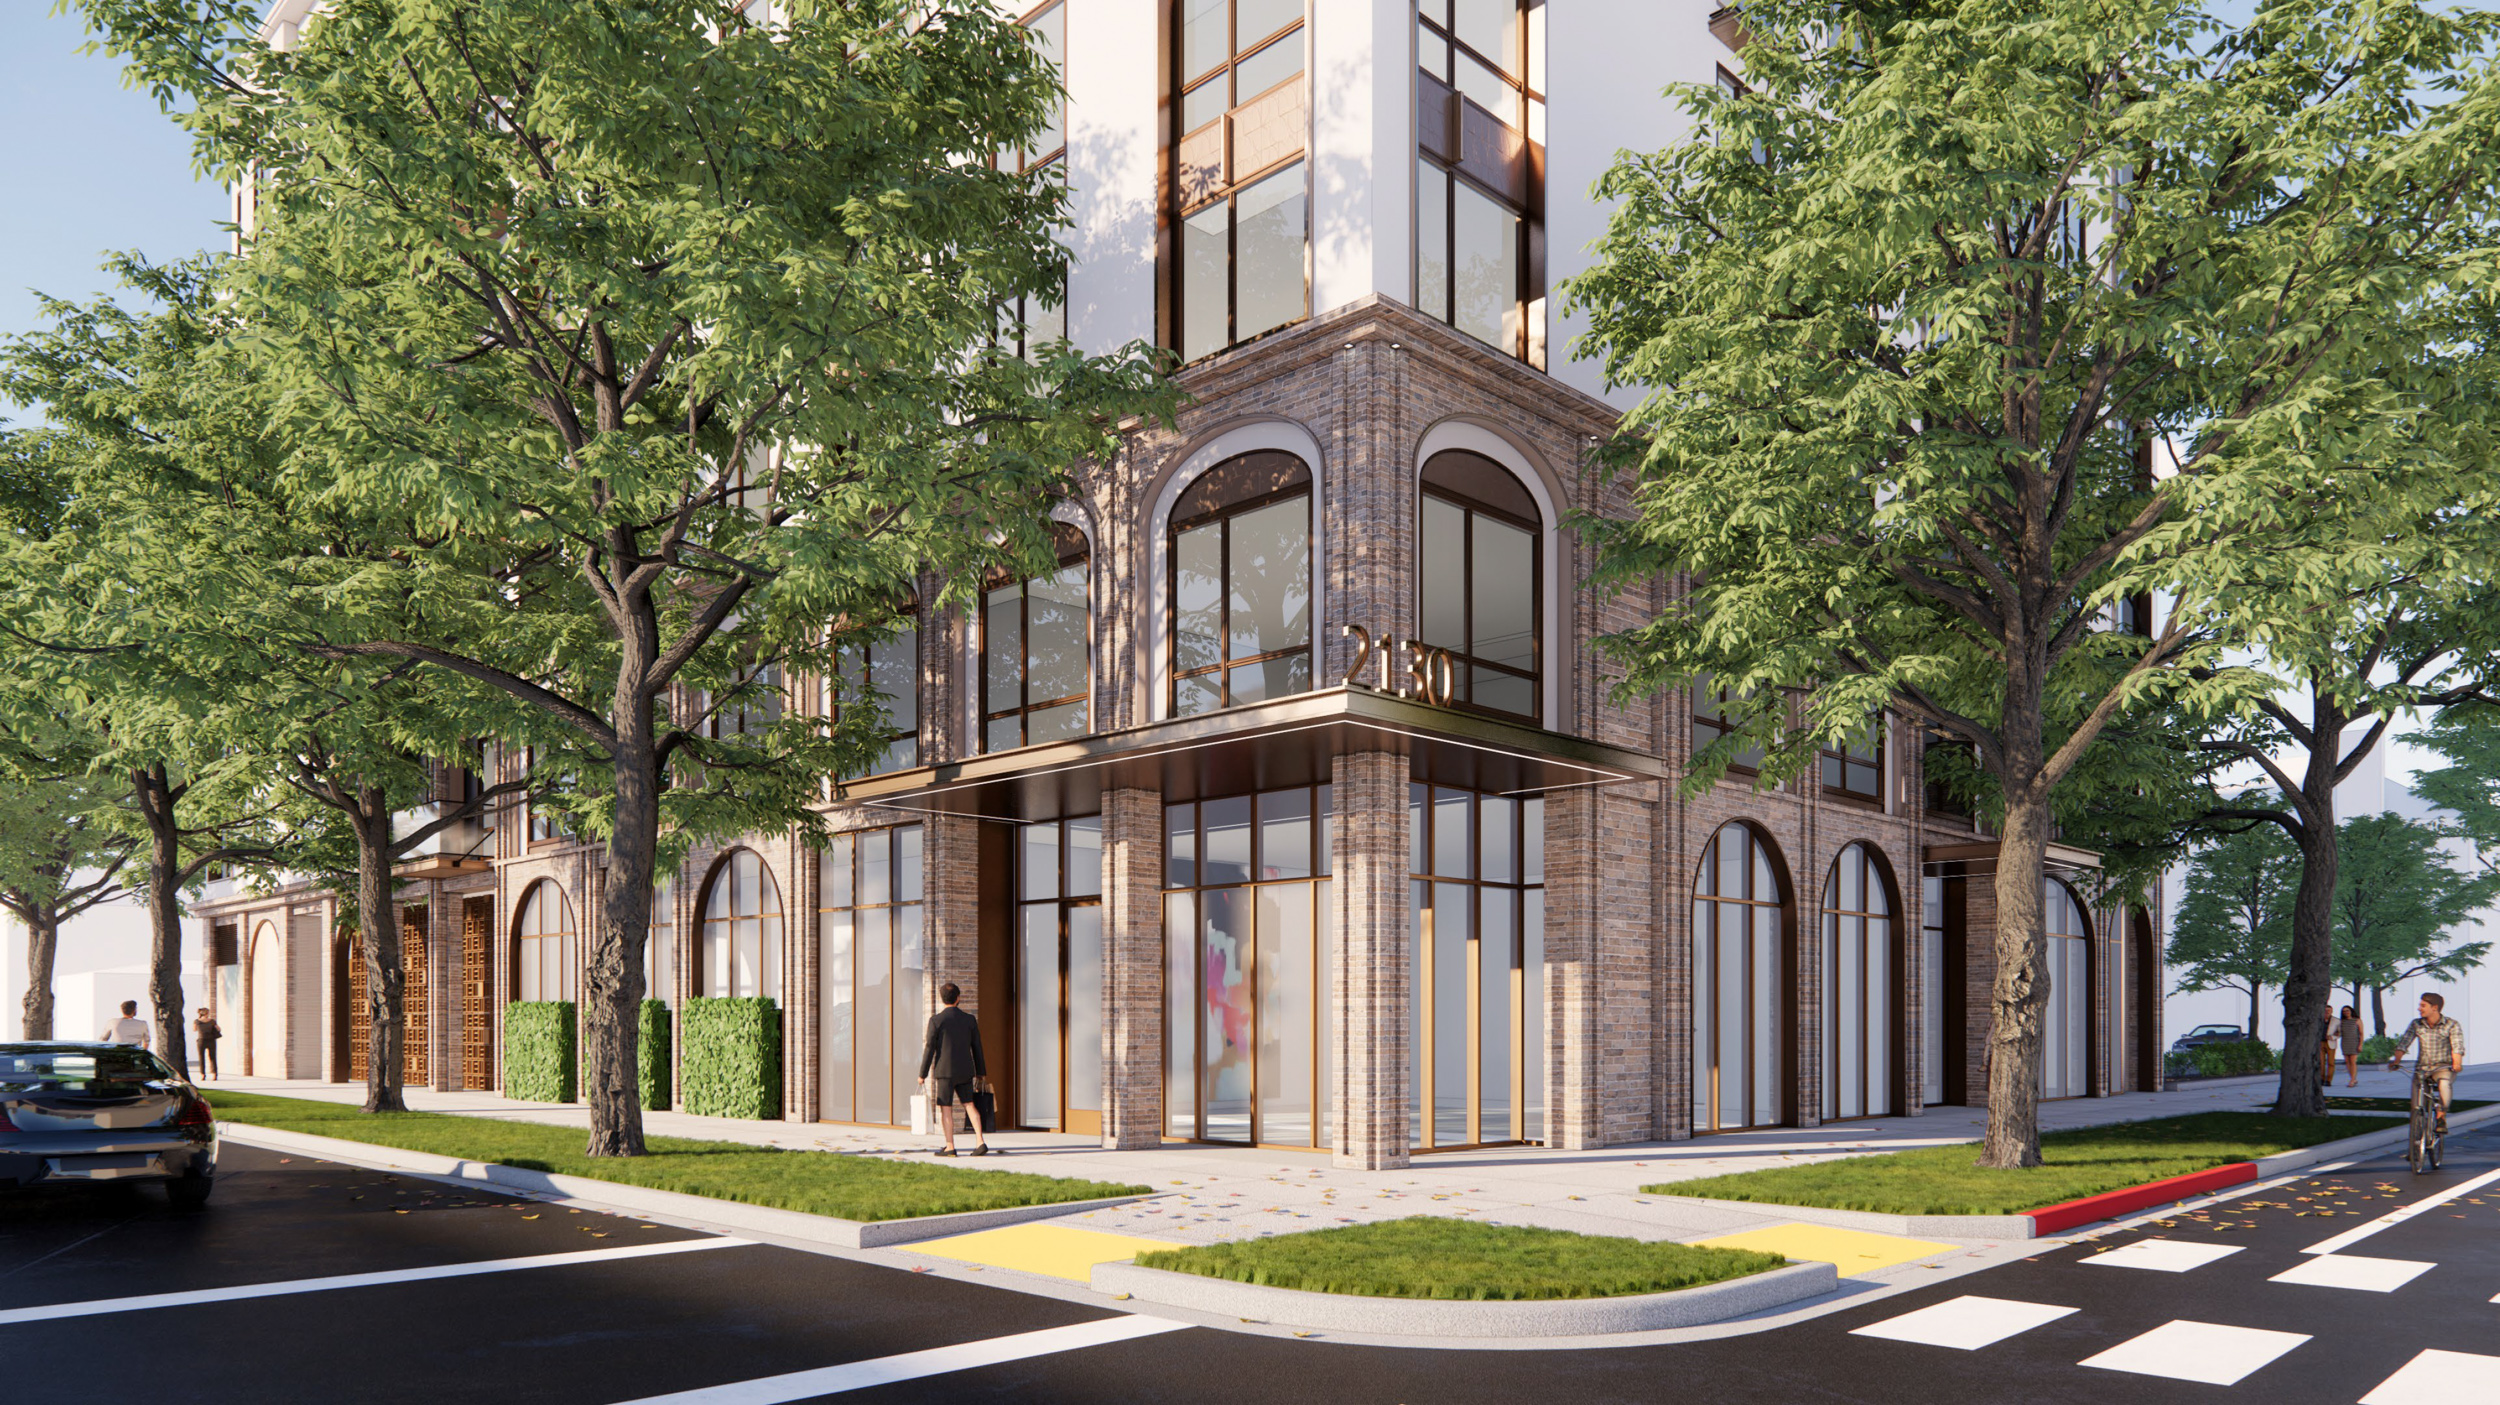 2130 J Street main entry view, rendering by LPAS Architecture + Design